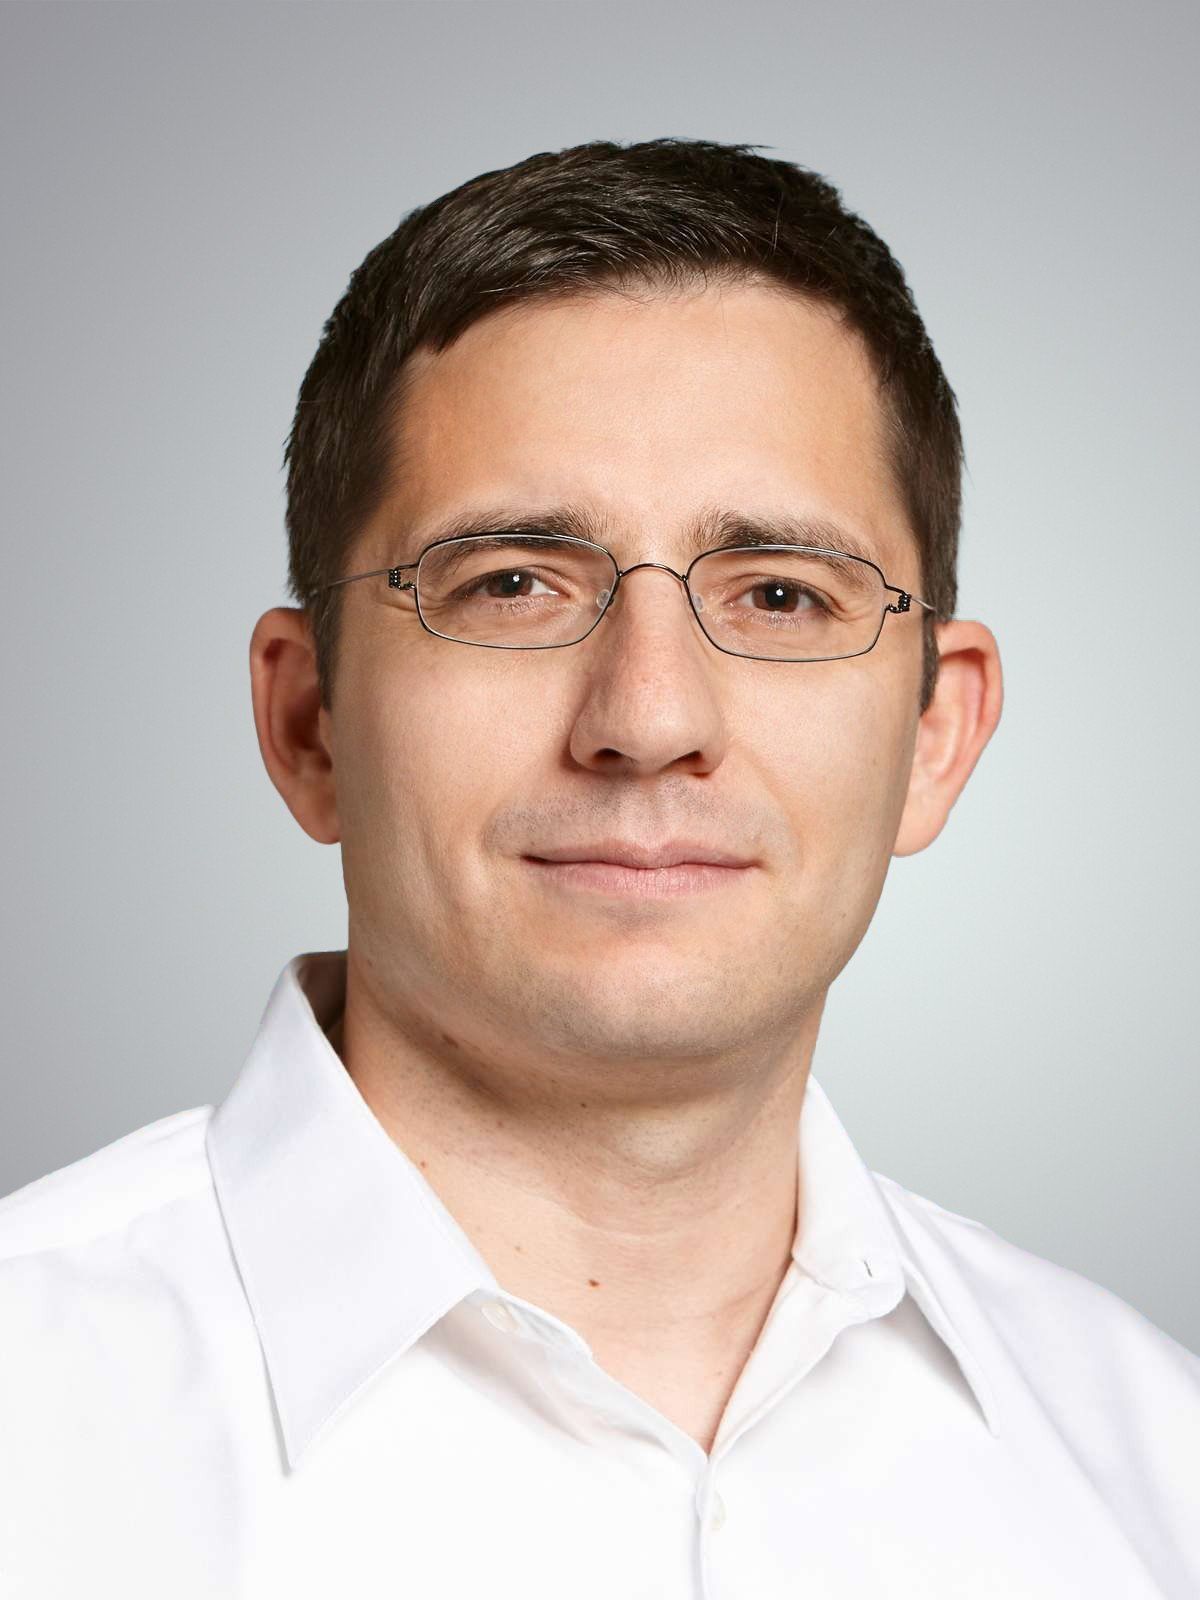 Martin Vechev, Professor at ETH Zurich and a recipient of the ERC Consolidator Grants